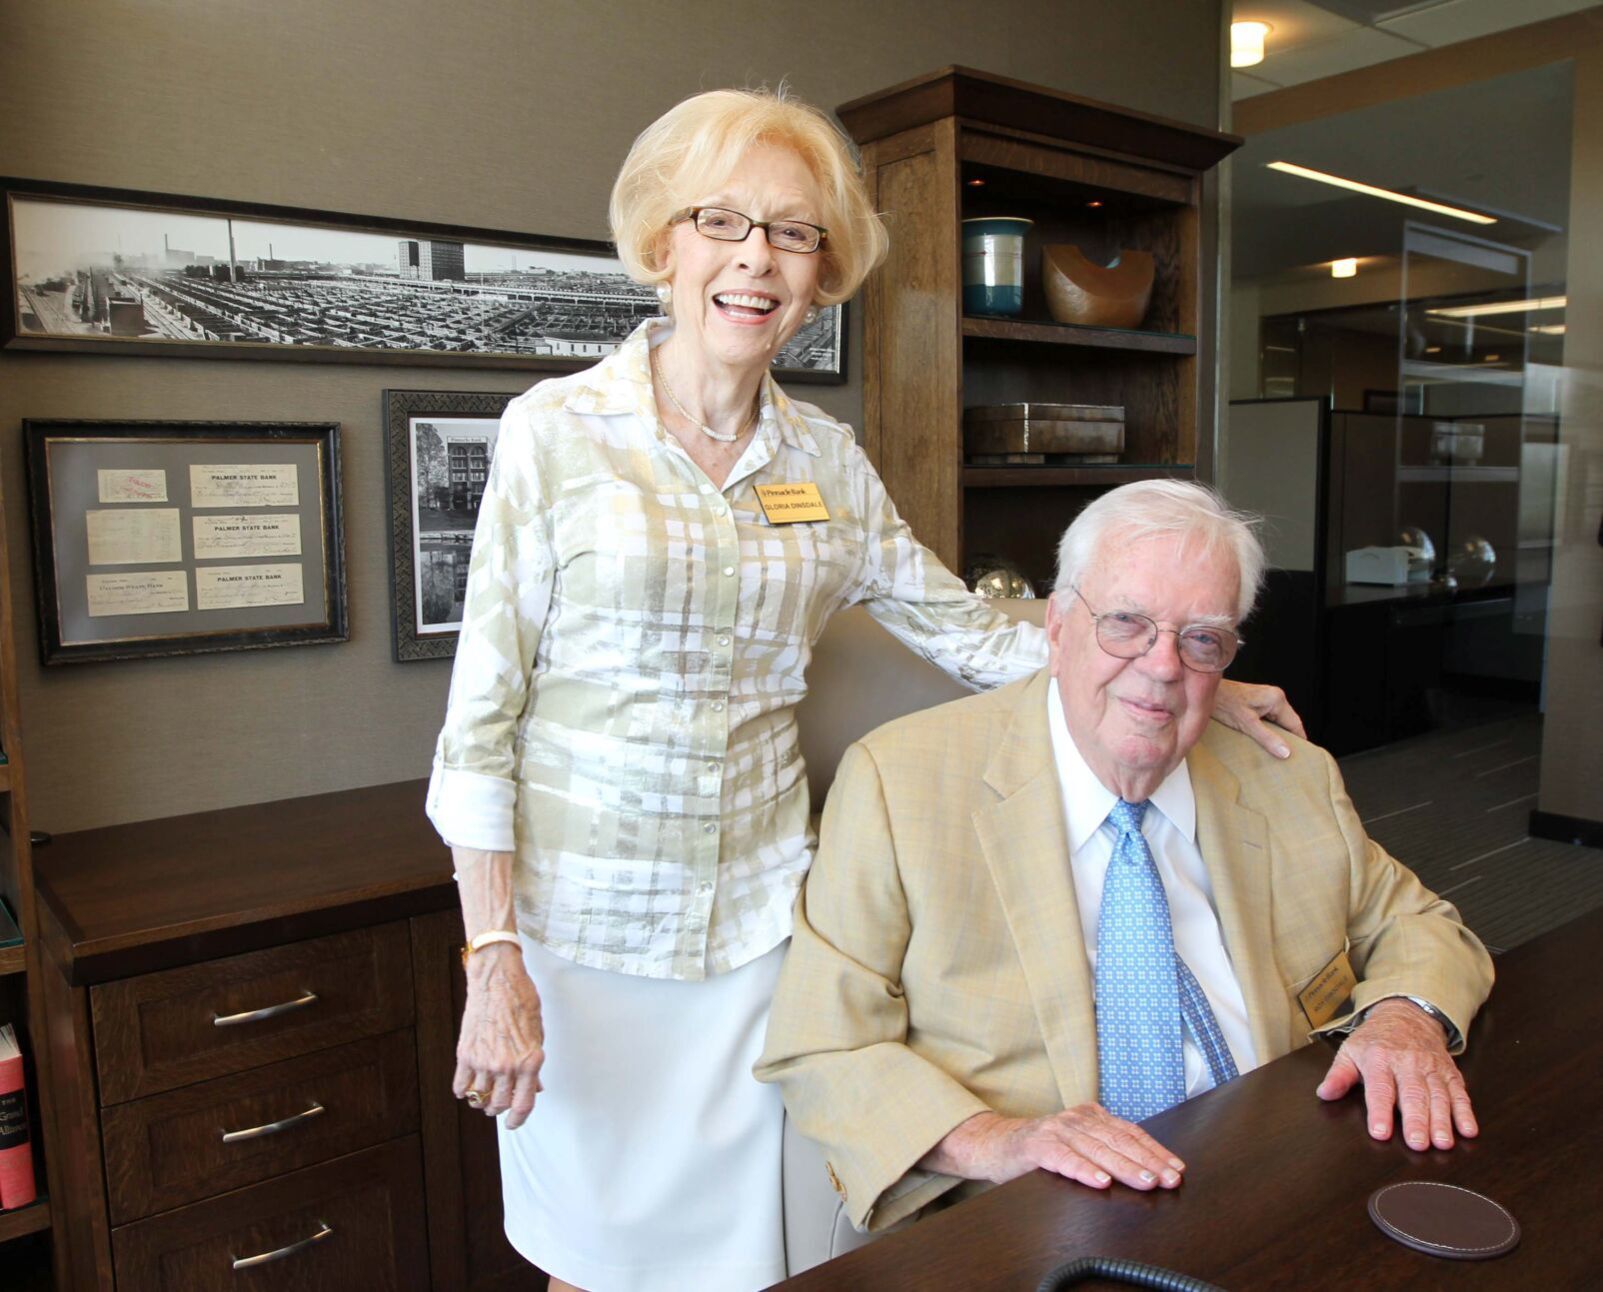 Pinnacle Bank chairman Roy Dinsdale drove the state visiting companys branches